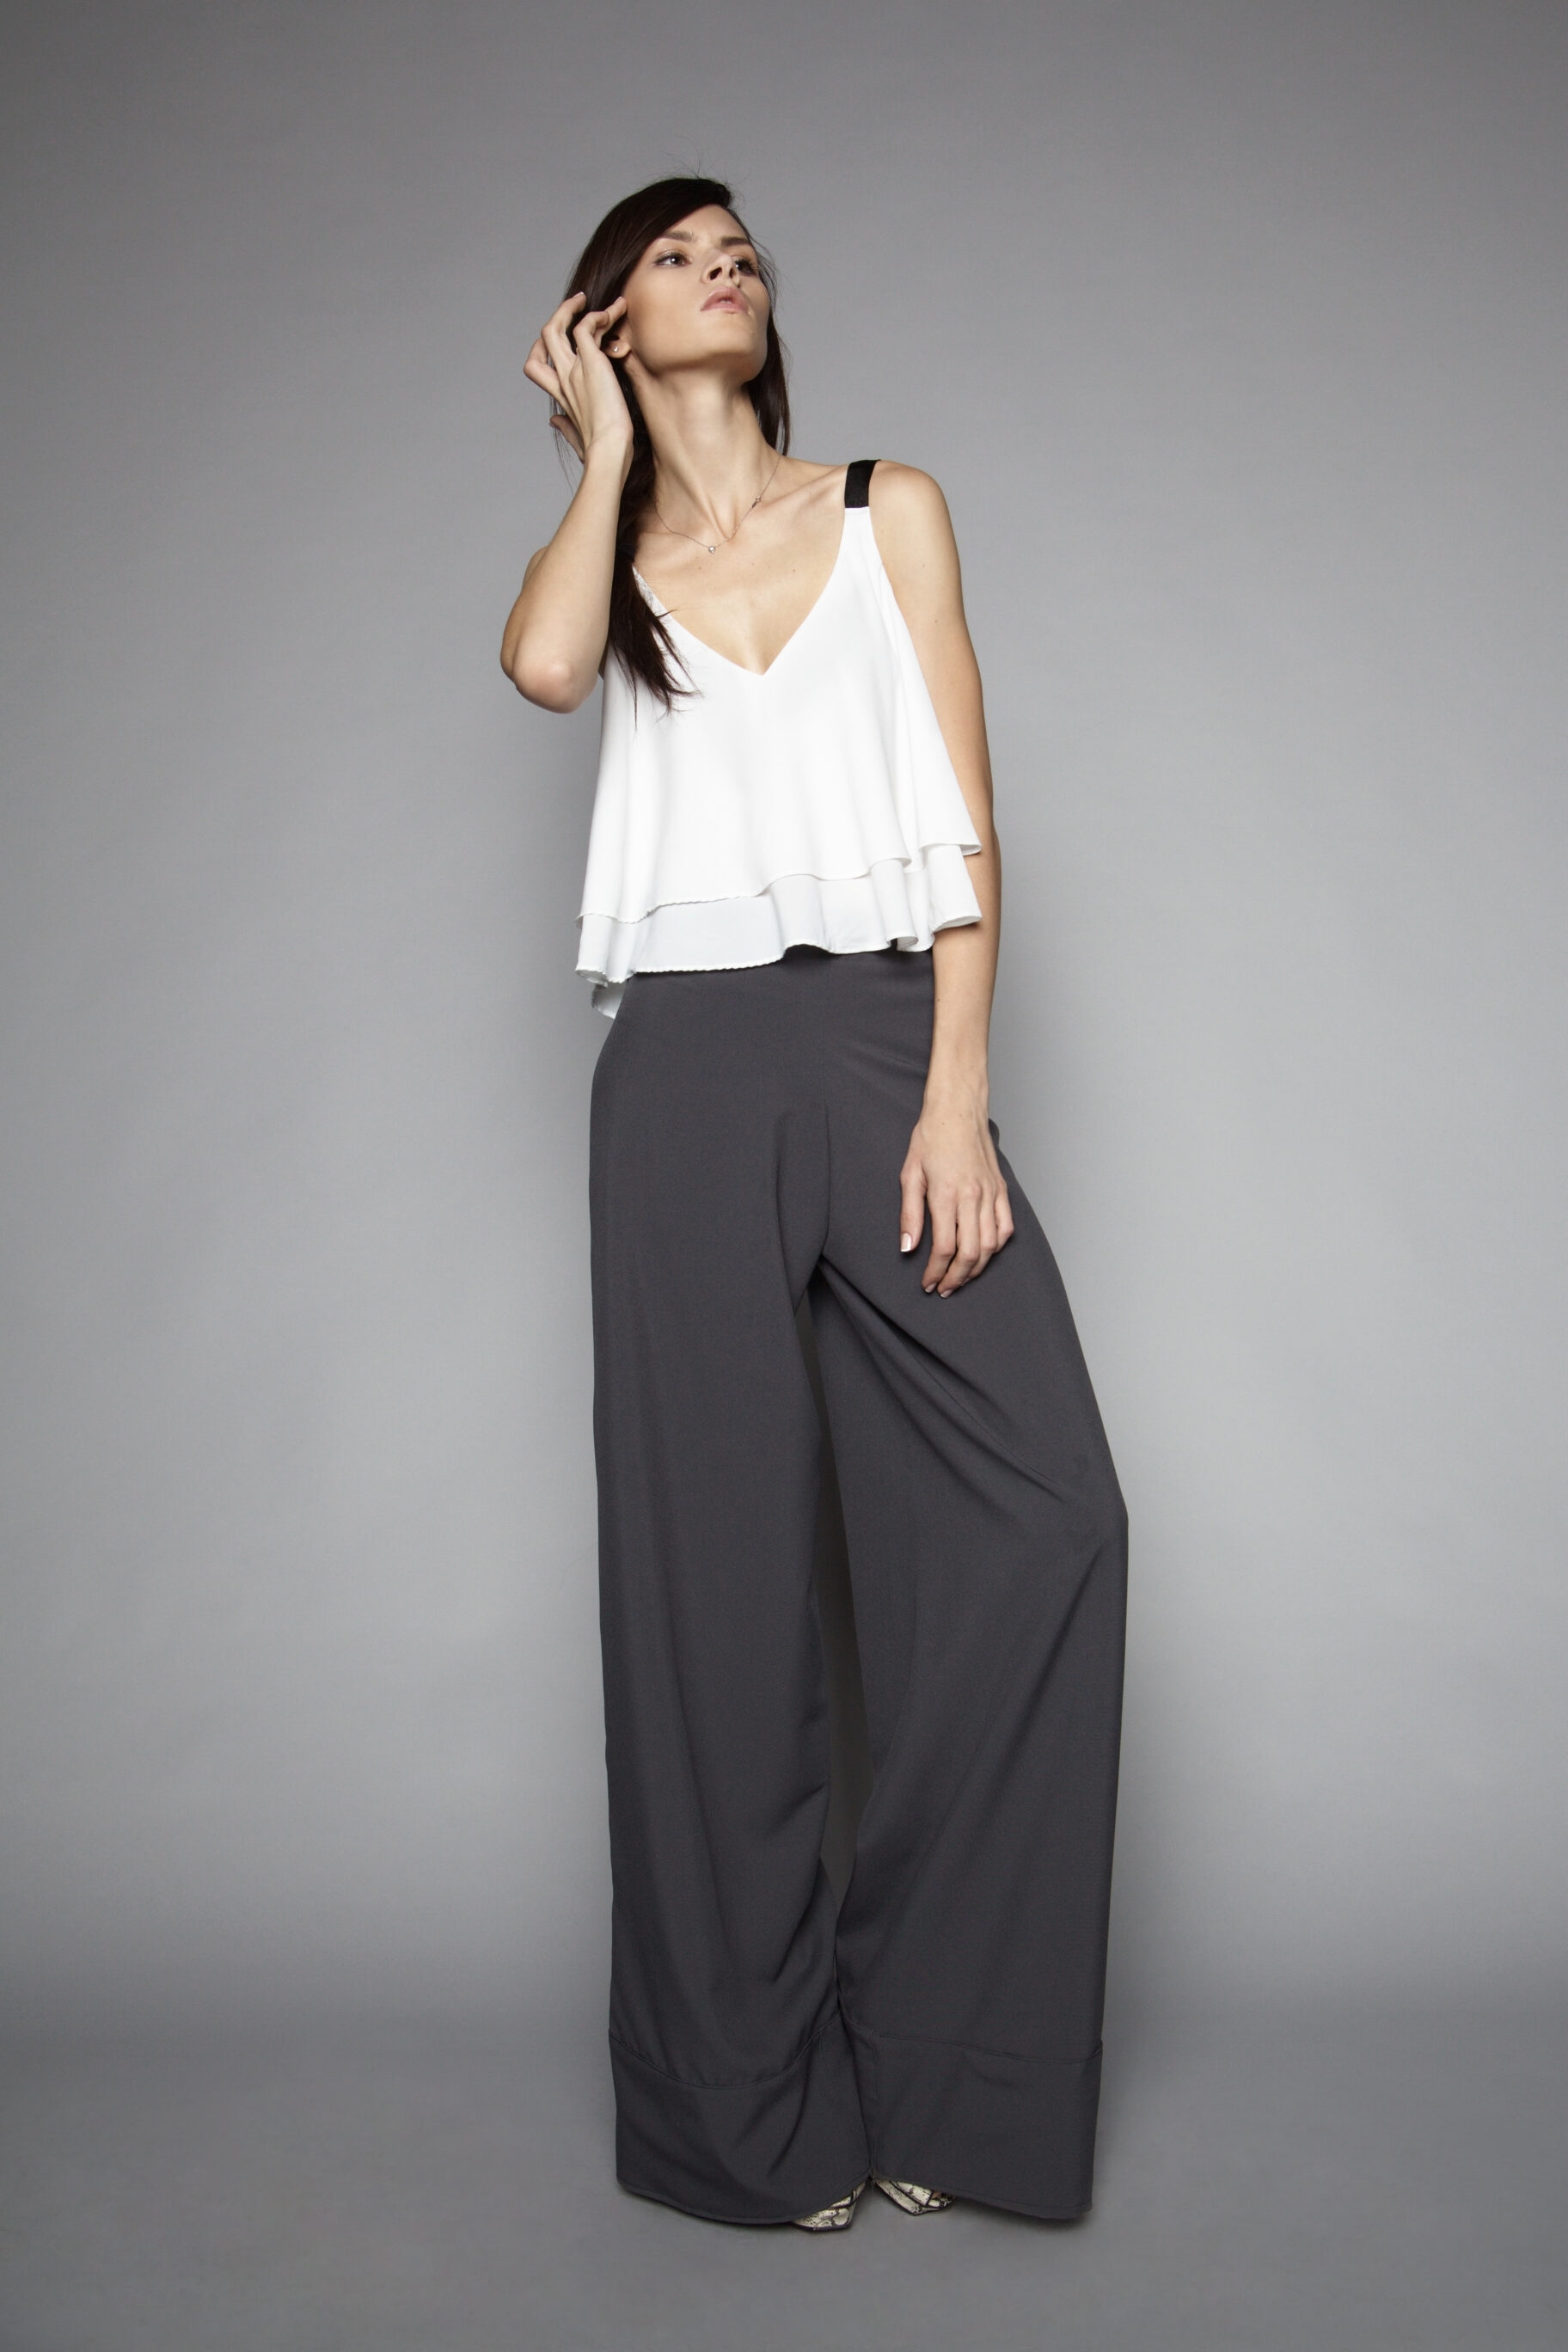 Crop Top With Gray Wide-Legged Pants For Women